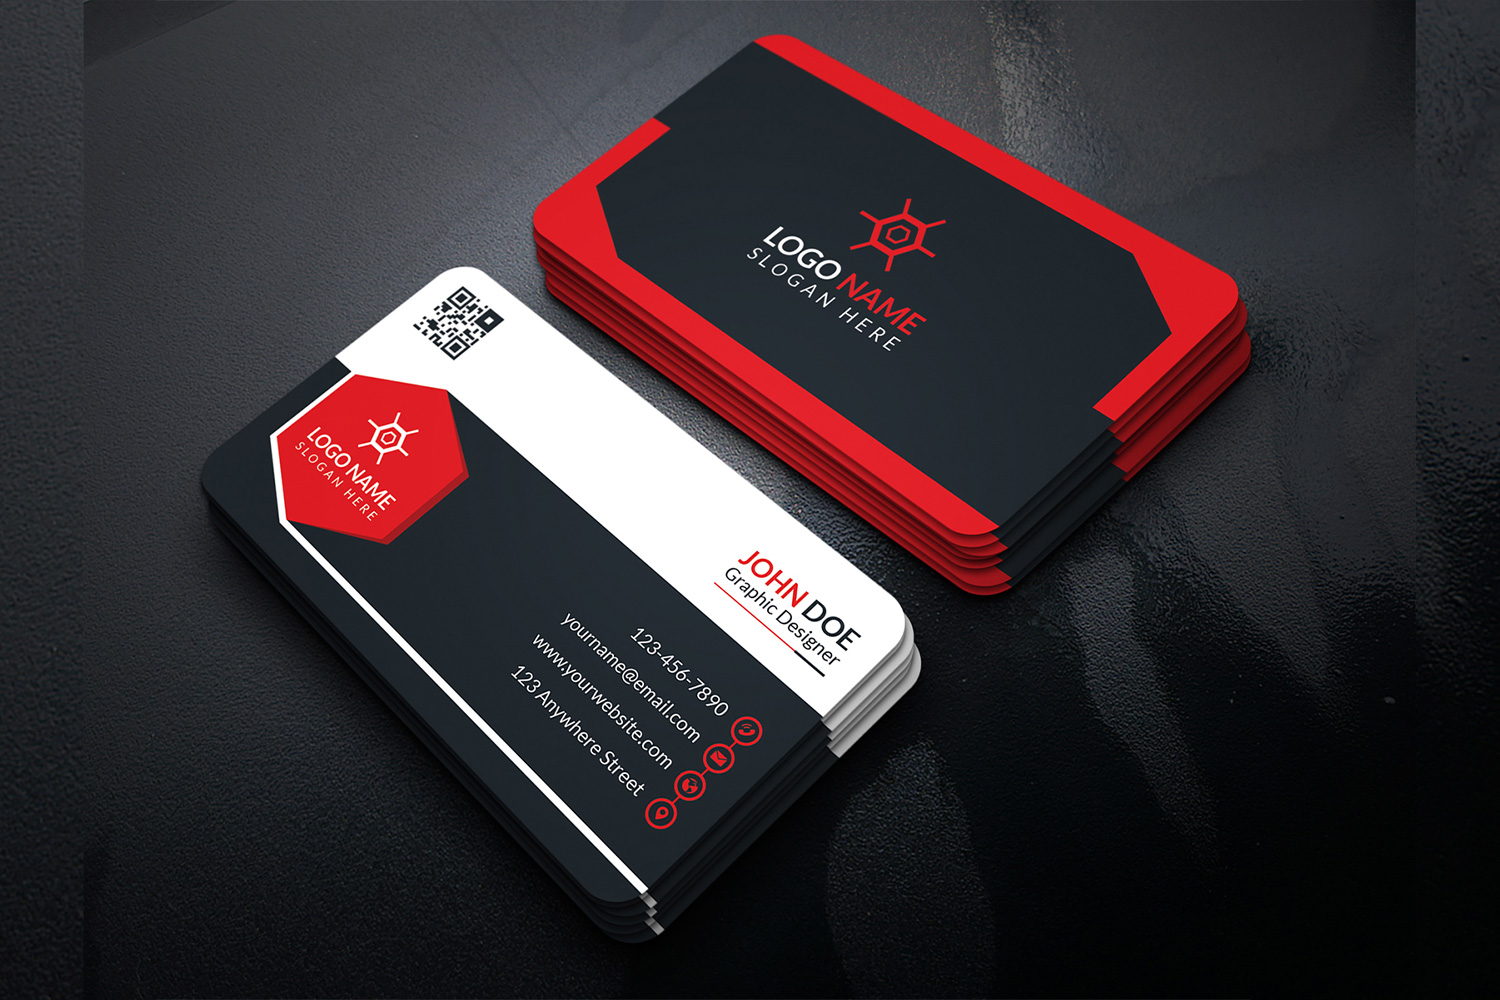 Stylish business cards in red and black colors.